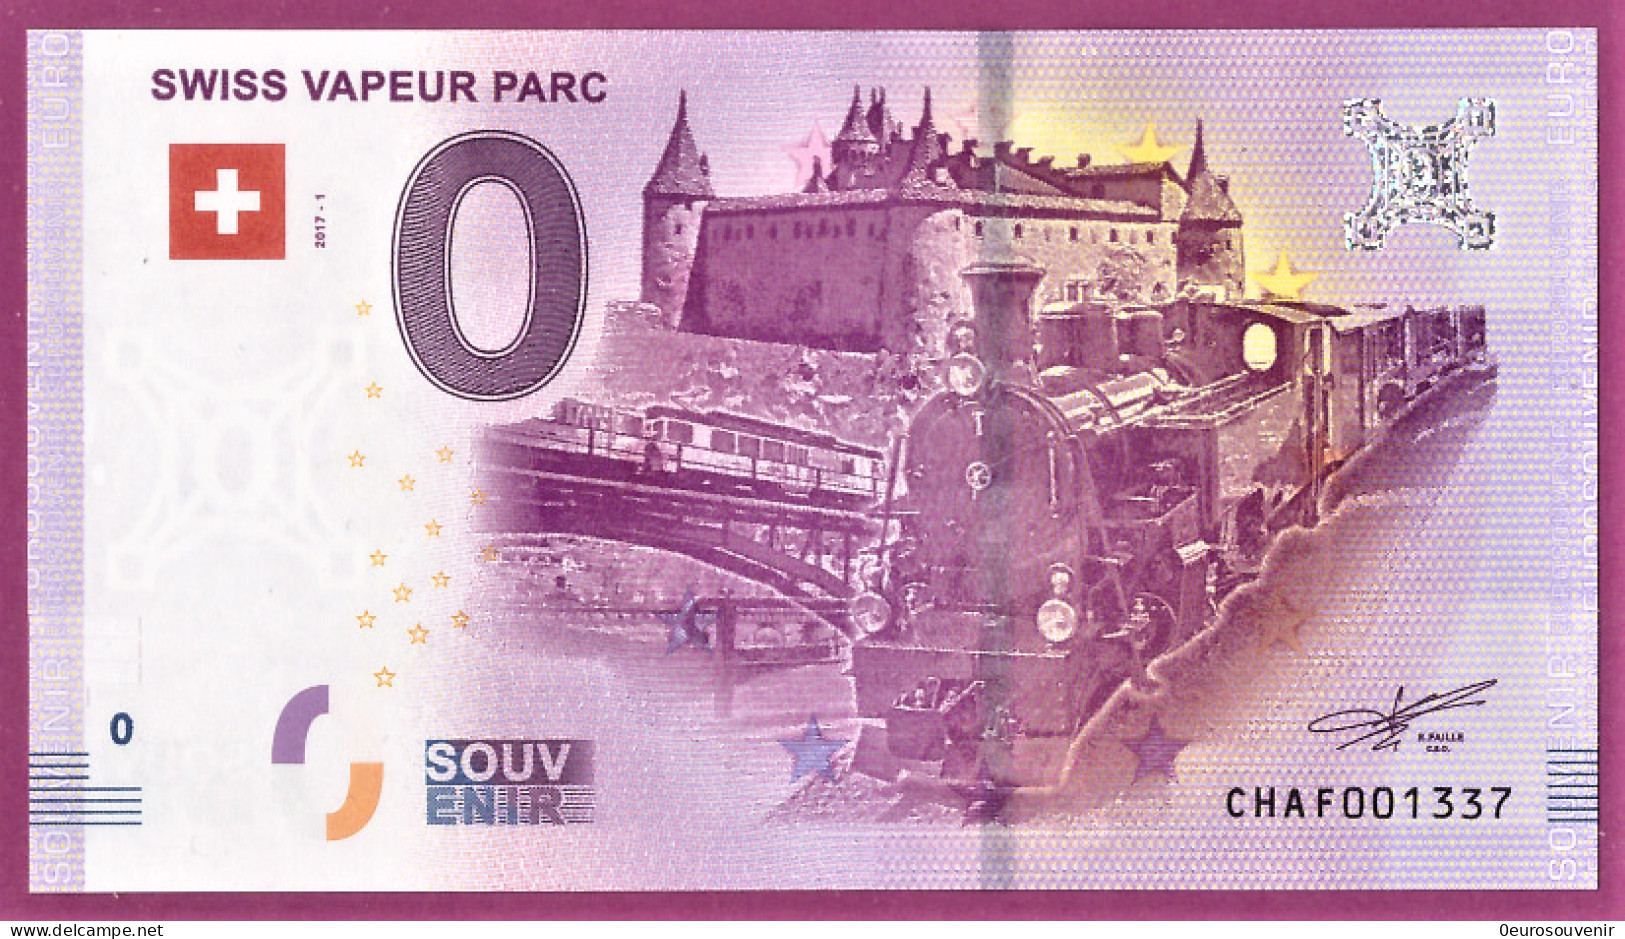 0-Euro CHAF 2017-1 SWISS VAPEUR PARC S-7f - Prove Private